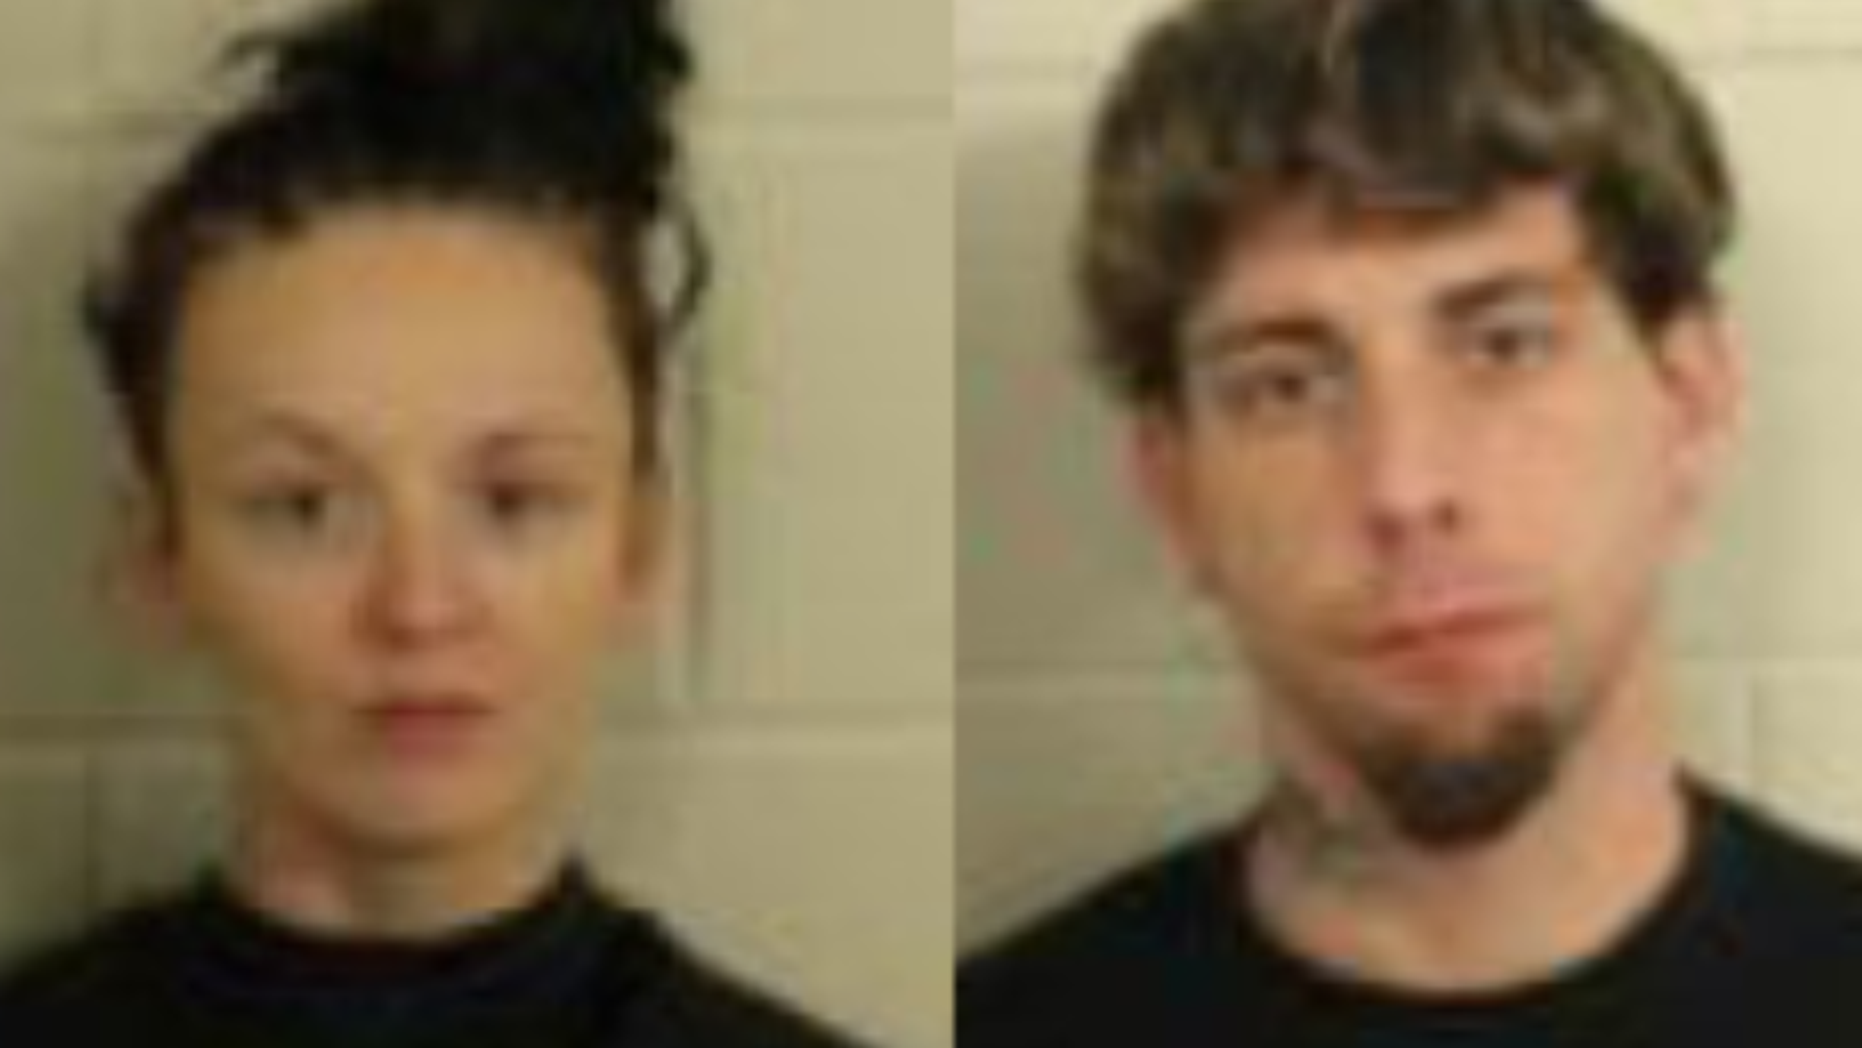 Georgia couple gave child, 4, meth-laced drink: police